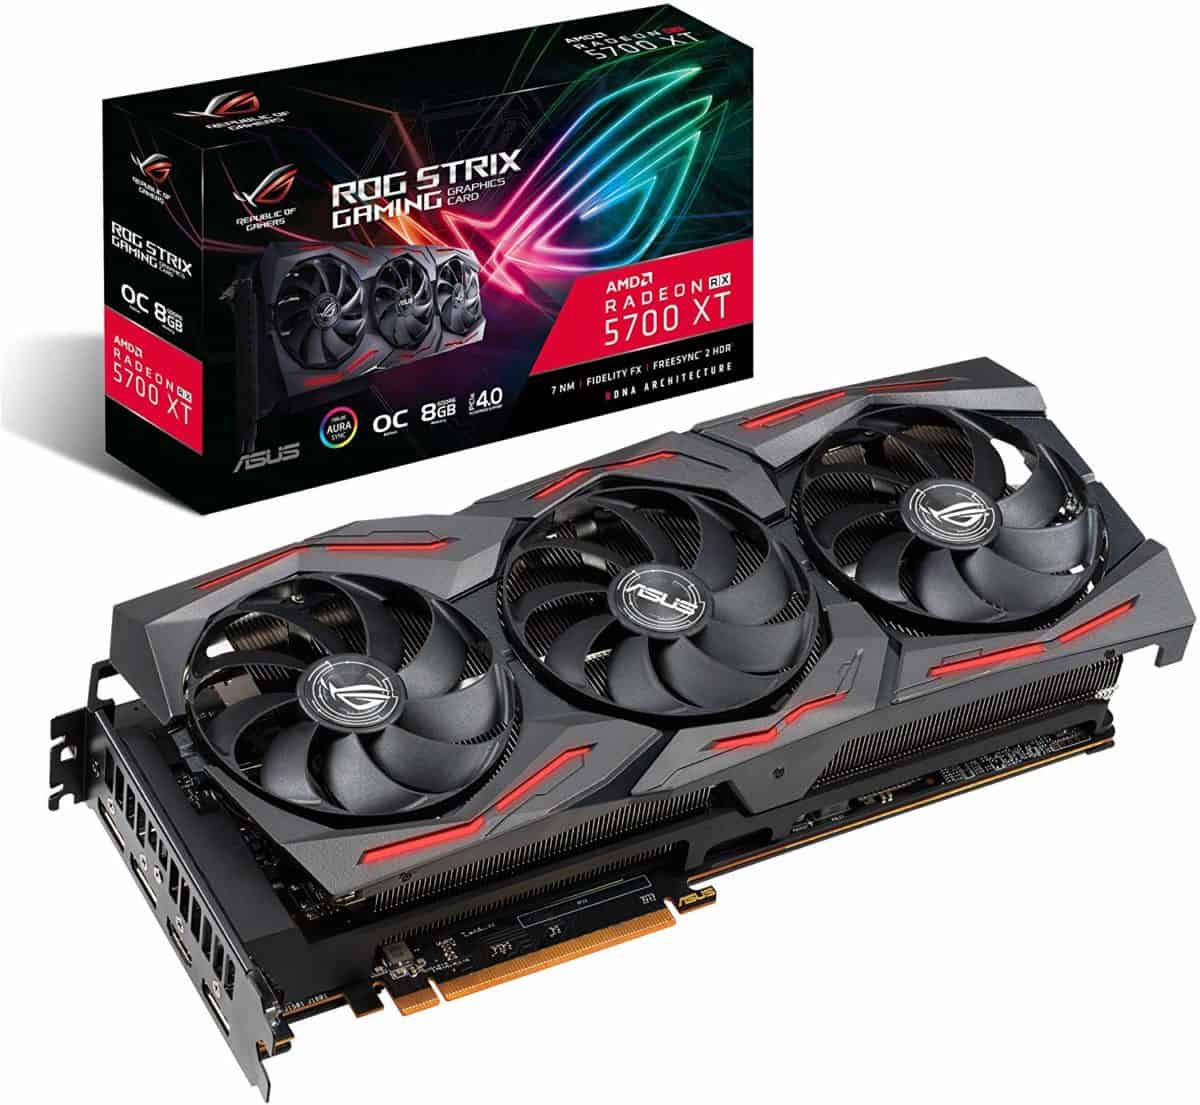 Best amd graphics card - raservacation